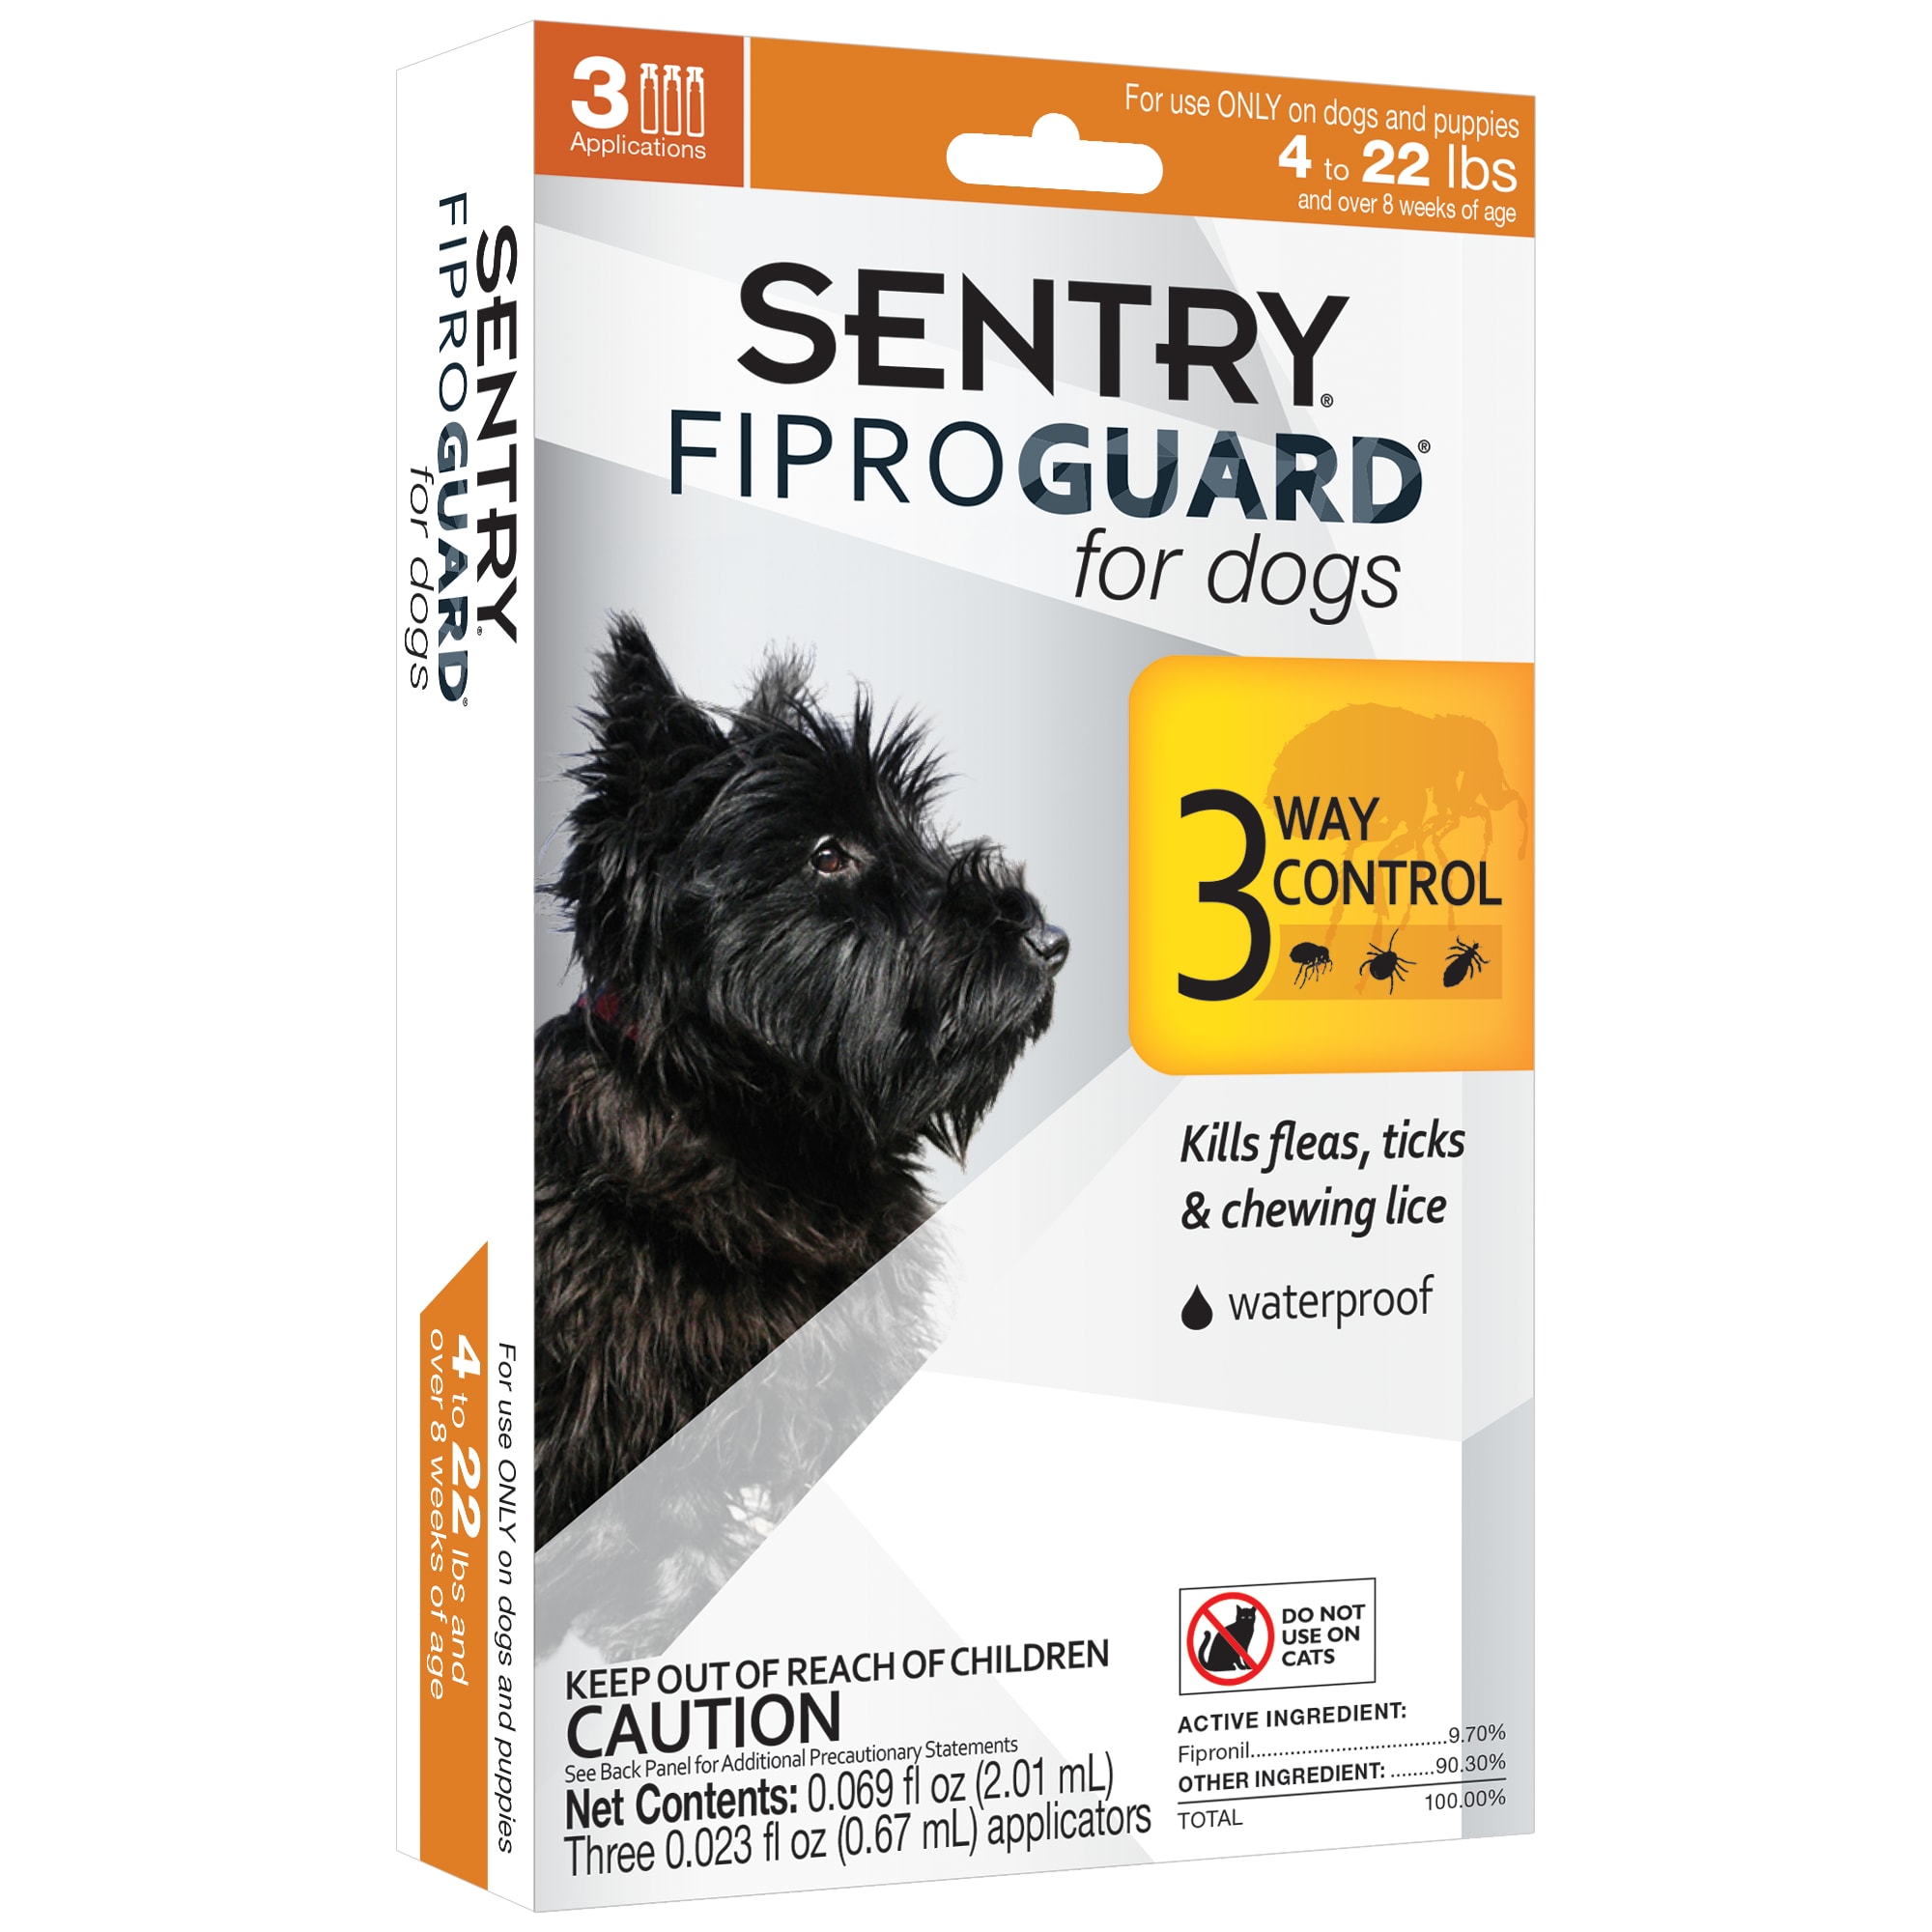 affordable flea treatment for dogs